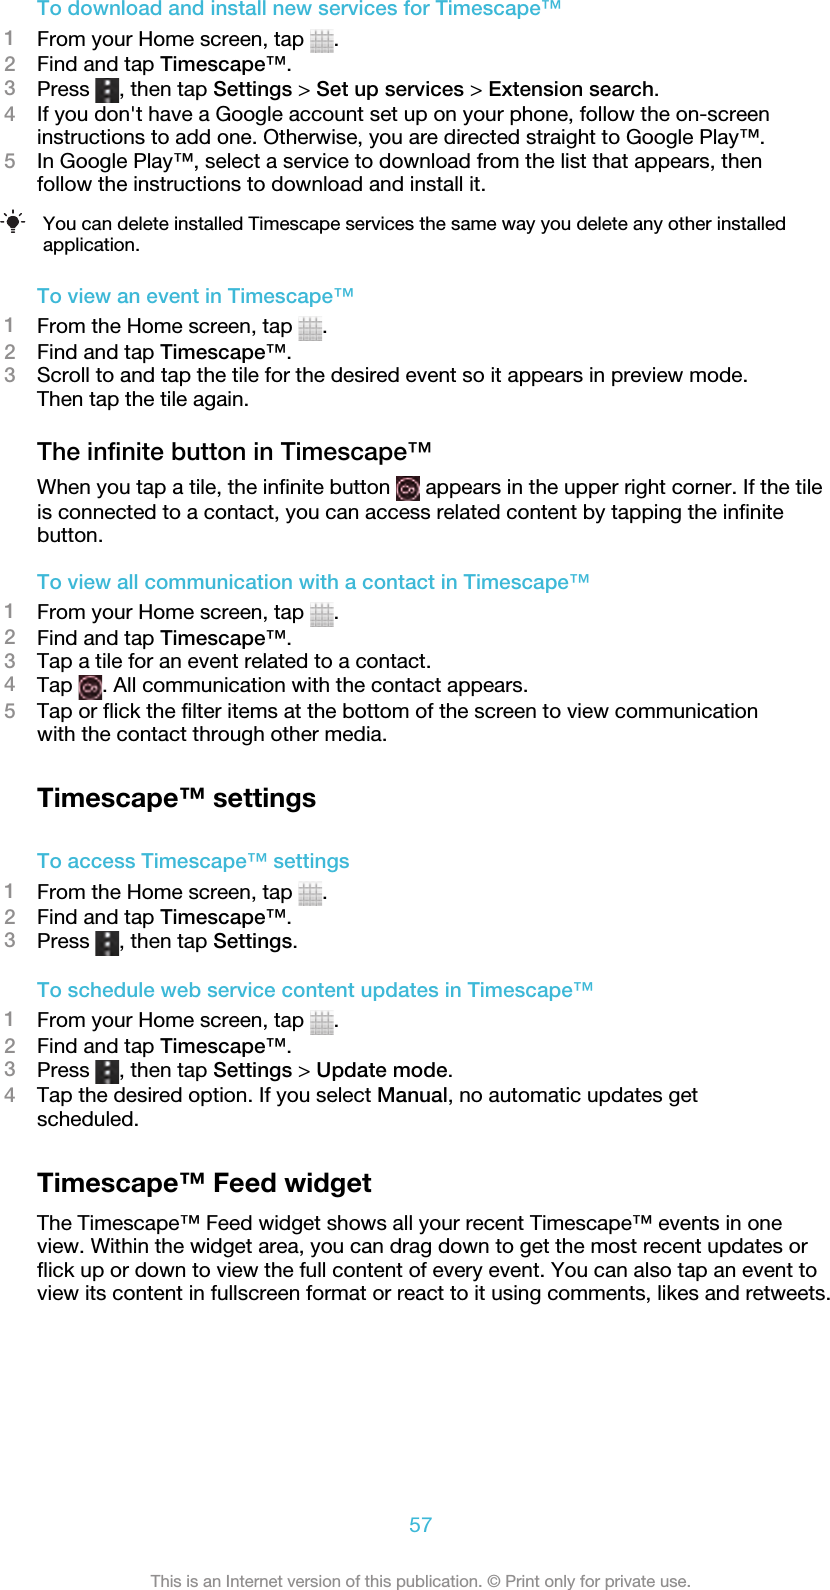 To download and install new services for Timescape™1From your Home screen, tap  .2Find and tap Timescape™.3Press  , then tap Settings &gt; Set up services &gt; Extension search.4If you don&apos;t have a Google account set up on your phone, follow the on-screeninstructions to add one. Otherwise, you are directed straight to Google Play™.5In Google Play™, select a service to download from the list that appears, thenfollow the instructions to download and install it.You can delete installed Timescape services the same way you delete any other installedapplication.To view an event in Timescape™1From the Home screen, tap  .2Find and tap Timescape™.3Scroll to and tap the tile for the desired event so it appears in preview mode.Then tap the tile again.The infinite button in Timescape™When you tap a tile, the infinite button   appears in the upper right corner. If the tileis connected to a contact, you can access related content by tapping the infinitebutton.To view all communication with a contact in Timescape™1From your Home screen, tap  .2Find and tap Timescape™.3Tap a tile for an event related to a contact.4Tap  . All communication with the contact appears.5Tap or flick the filter items at the bottom of the screen to view communicationwith the contact through other media.Timescape™ settingsTo access Timescape™ settings1From the Home screen, tap  .2Find and tap Timescape™.3Press  , then tap Settings.To schedule web service content updates in Timescape™1From your Home screen, tap  .2Find and tap Timescape™.3Press  , then tap Settings &gt; Update mode.4Tap the desired option. If you select Manual, no automatic updates getscheduled.Timescape™ Feed widgetThe Timescape™ Feed widget shows all your recent Timescape™ events in oneview. Within the widget area, you can drag down to get the most recent updates orflick up or down to view the full content of every event. You can also tap an event toview its content in fullscreen format or react to it using comments, likes and retweets.57This is an Internet version of this publication. © Print only for private use.